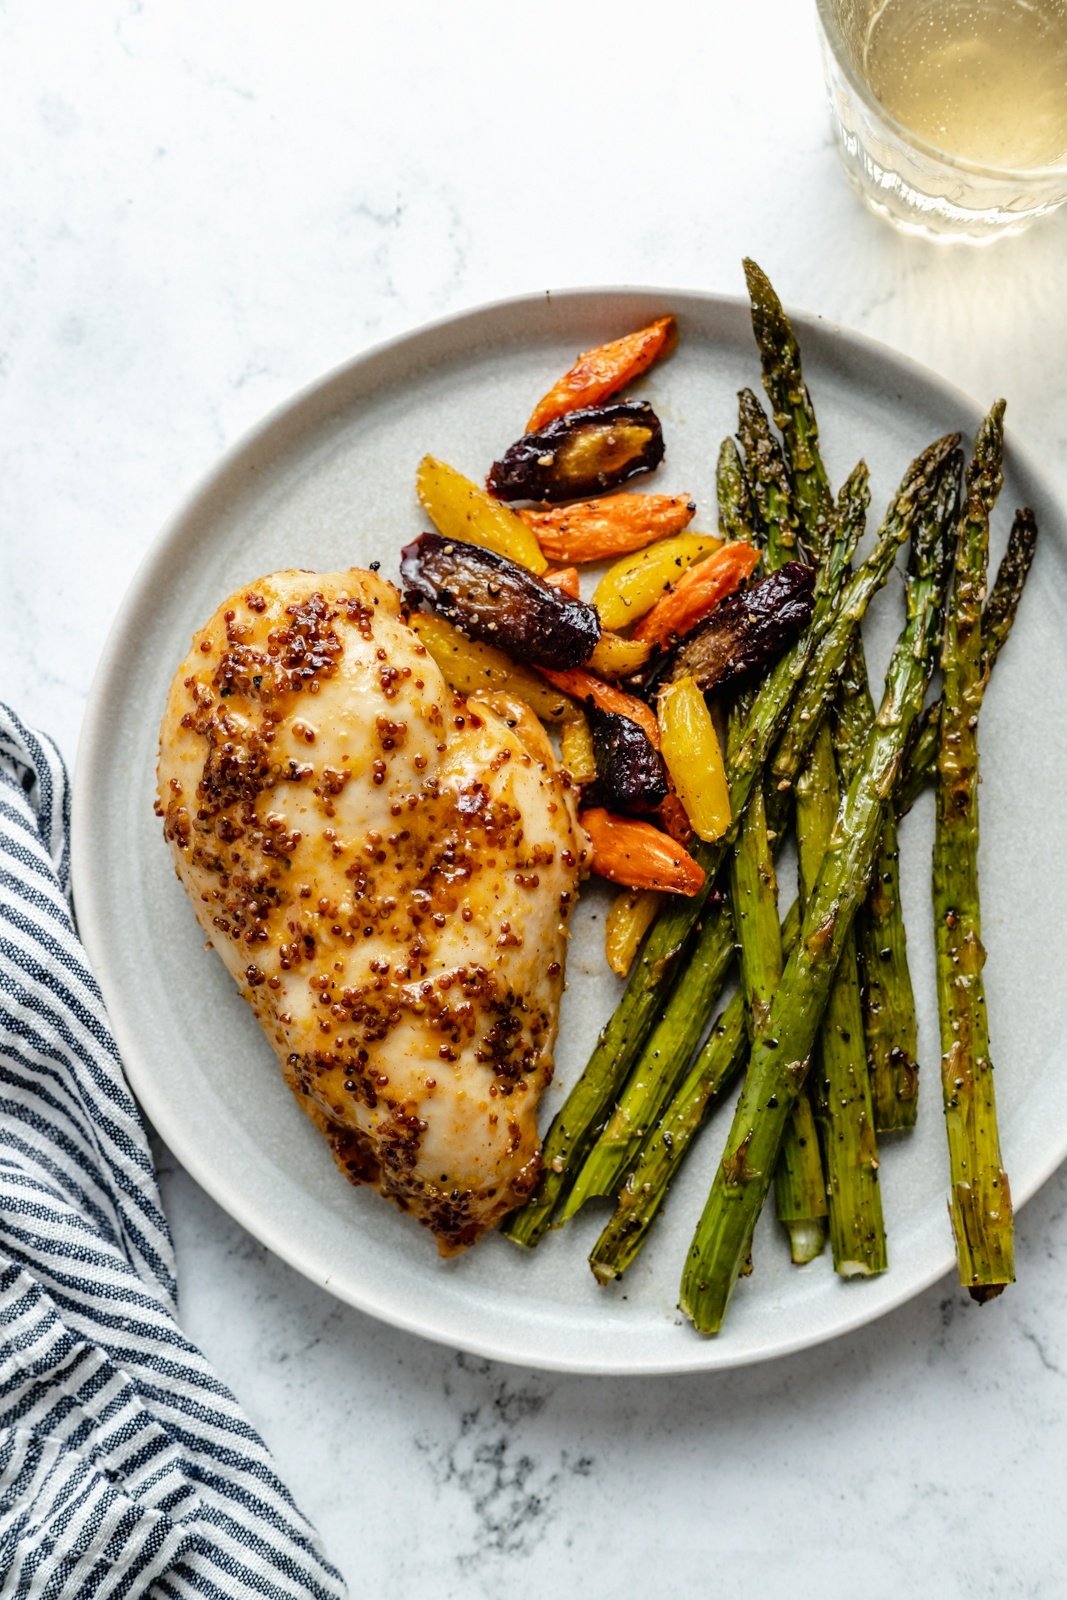 Juicy BBQ Chicken Breasts in the Oven: Tips, Tools, and Serving Ideas